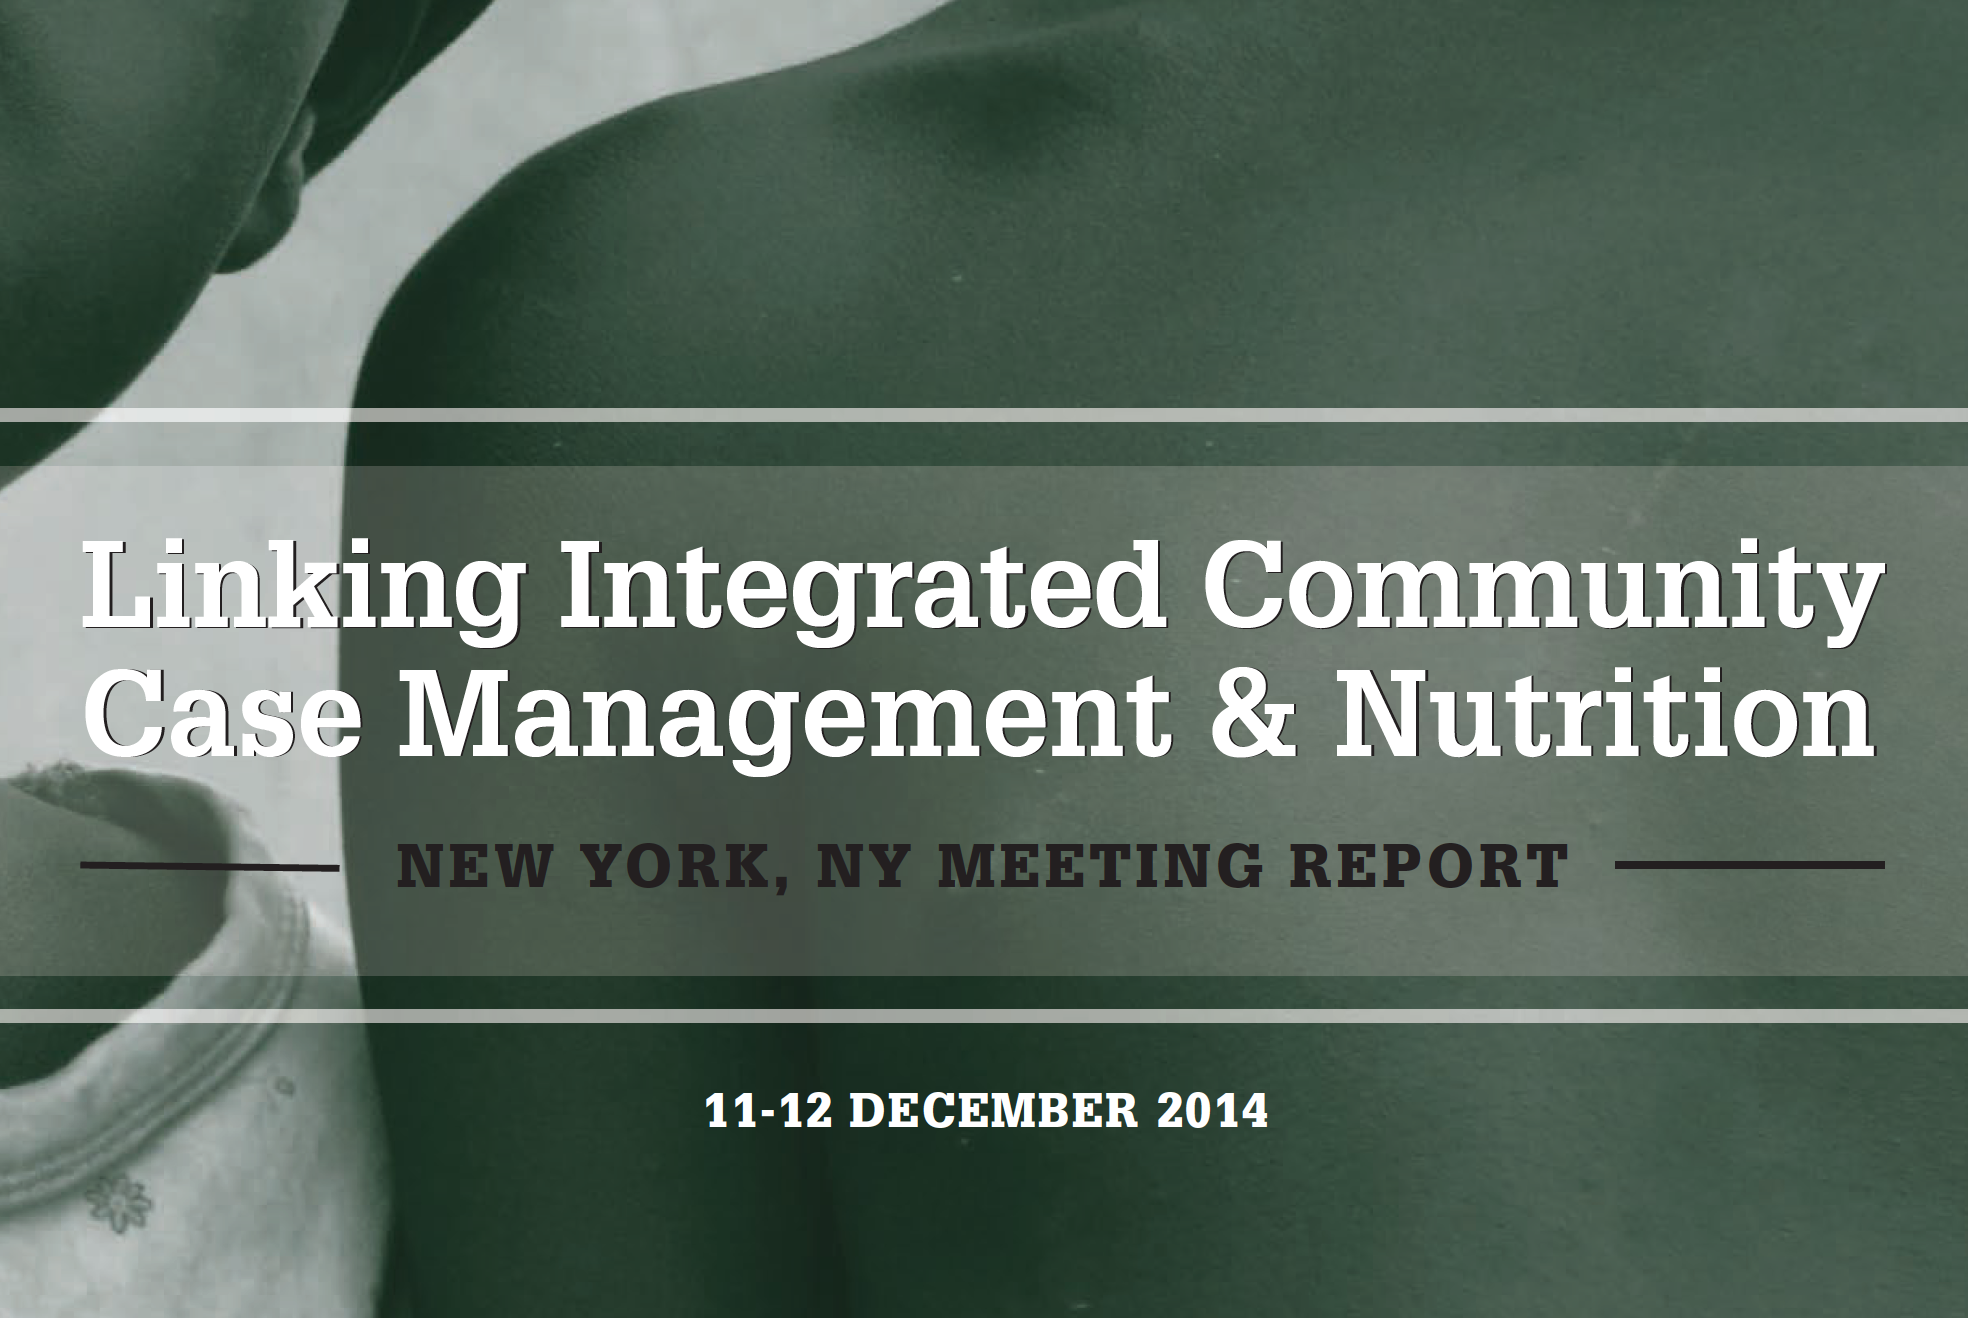 Photo: Linking iCCM and Nutrition NYC Meeting Report_2014 cover